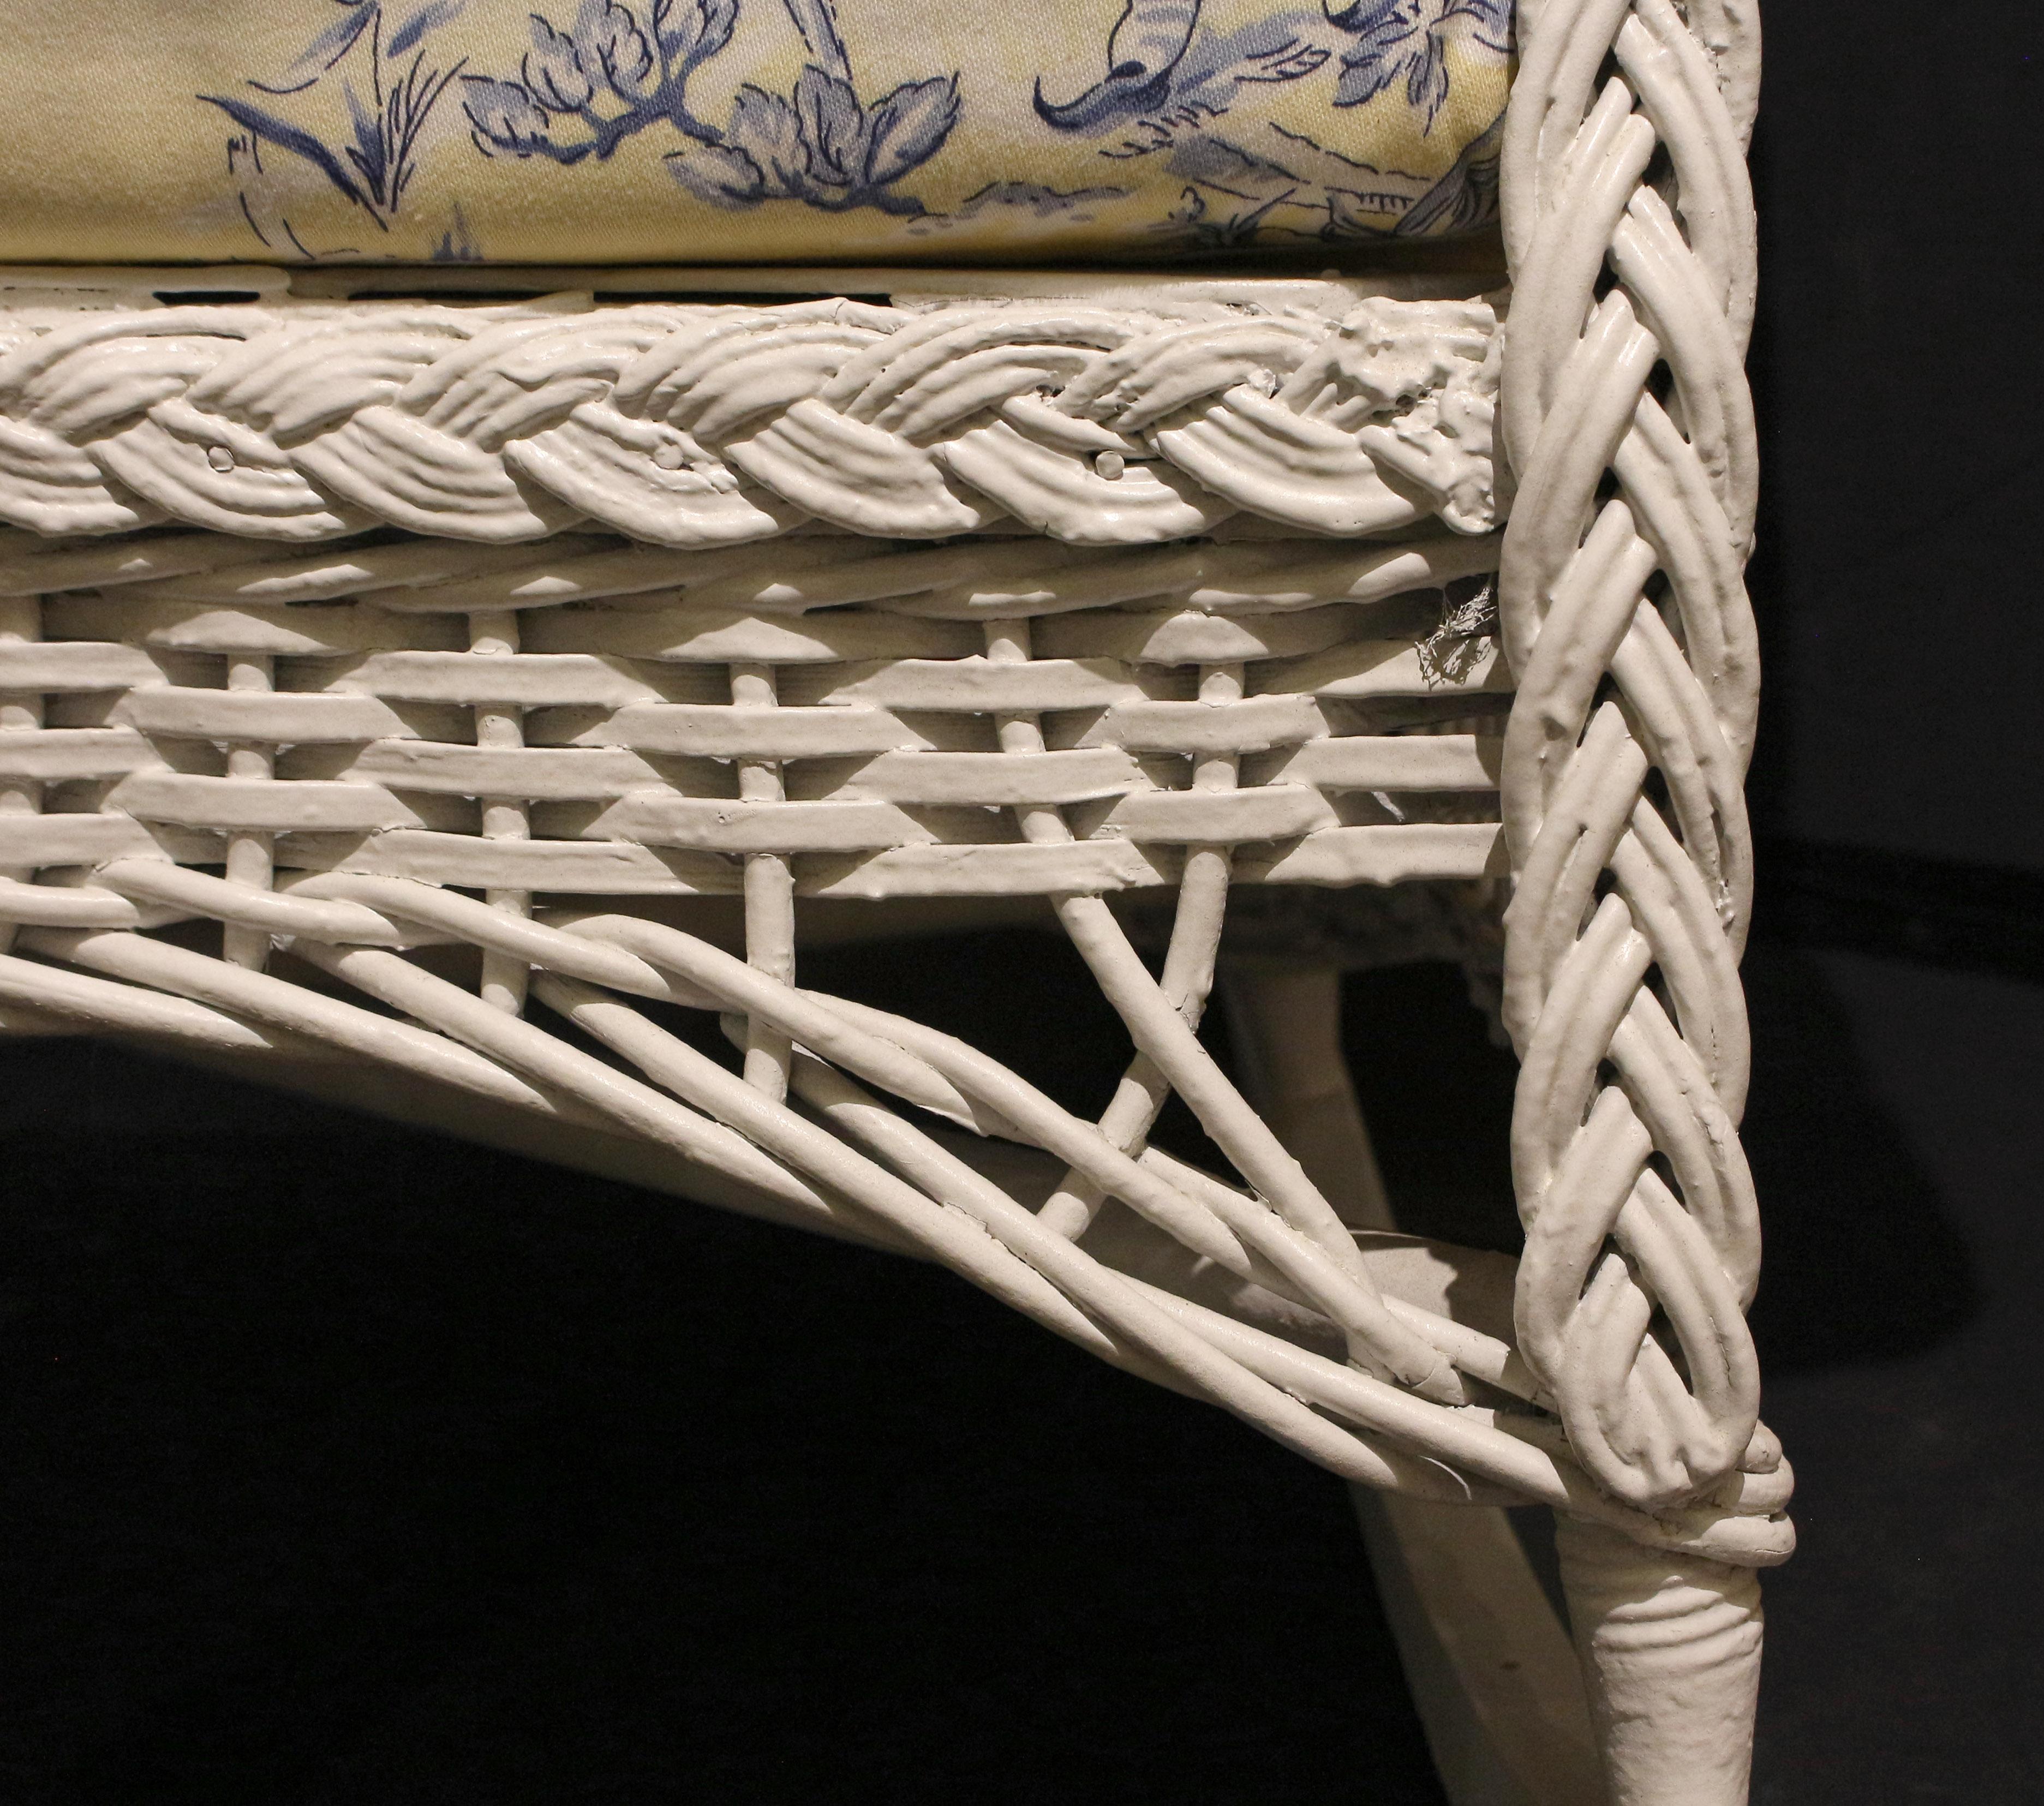 Early 20th Century Heywood-Wakefield Bar Harbor Wicker Rocking Chair For Sale 4